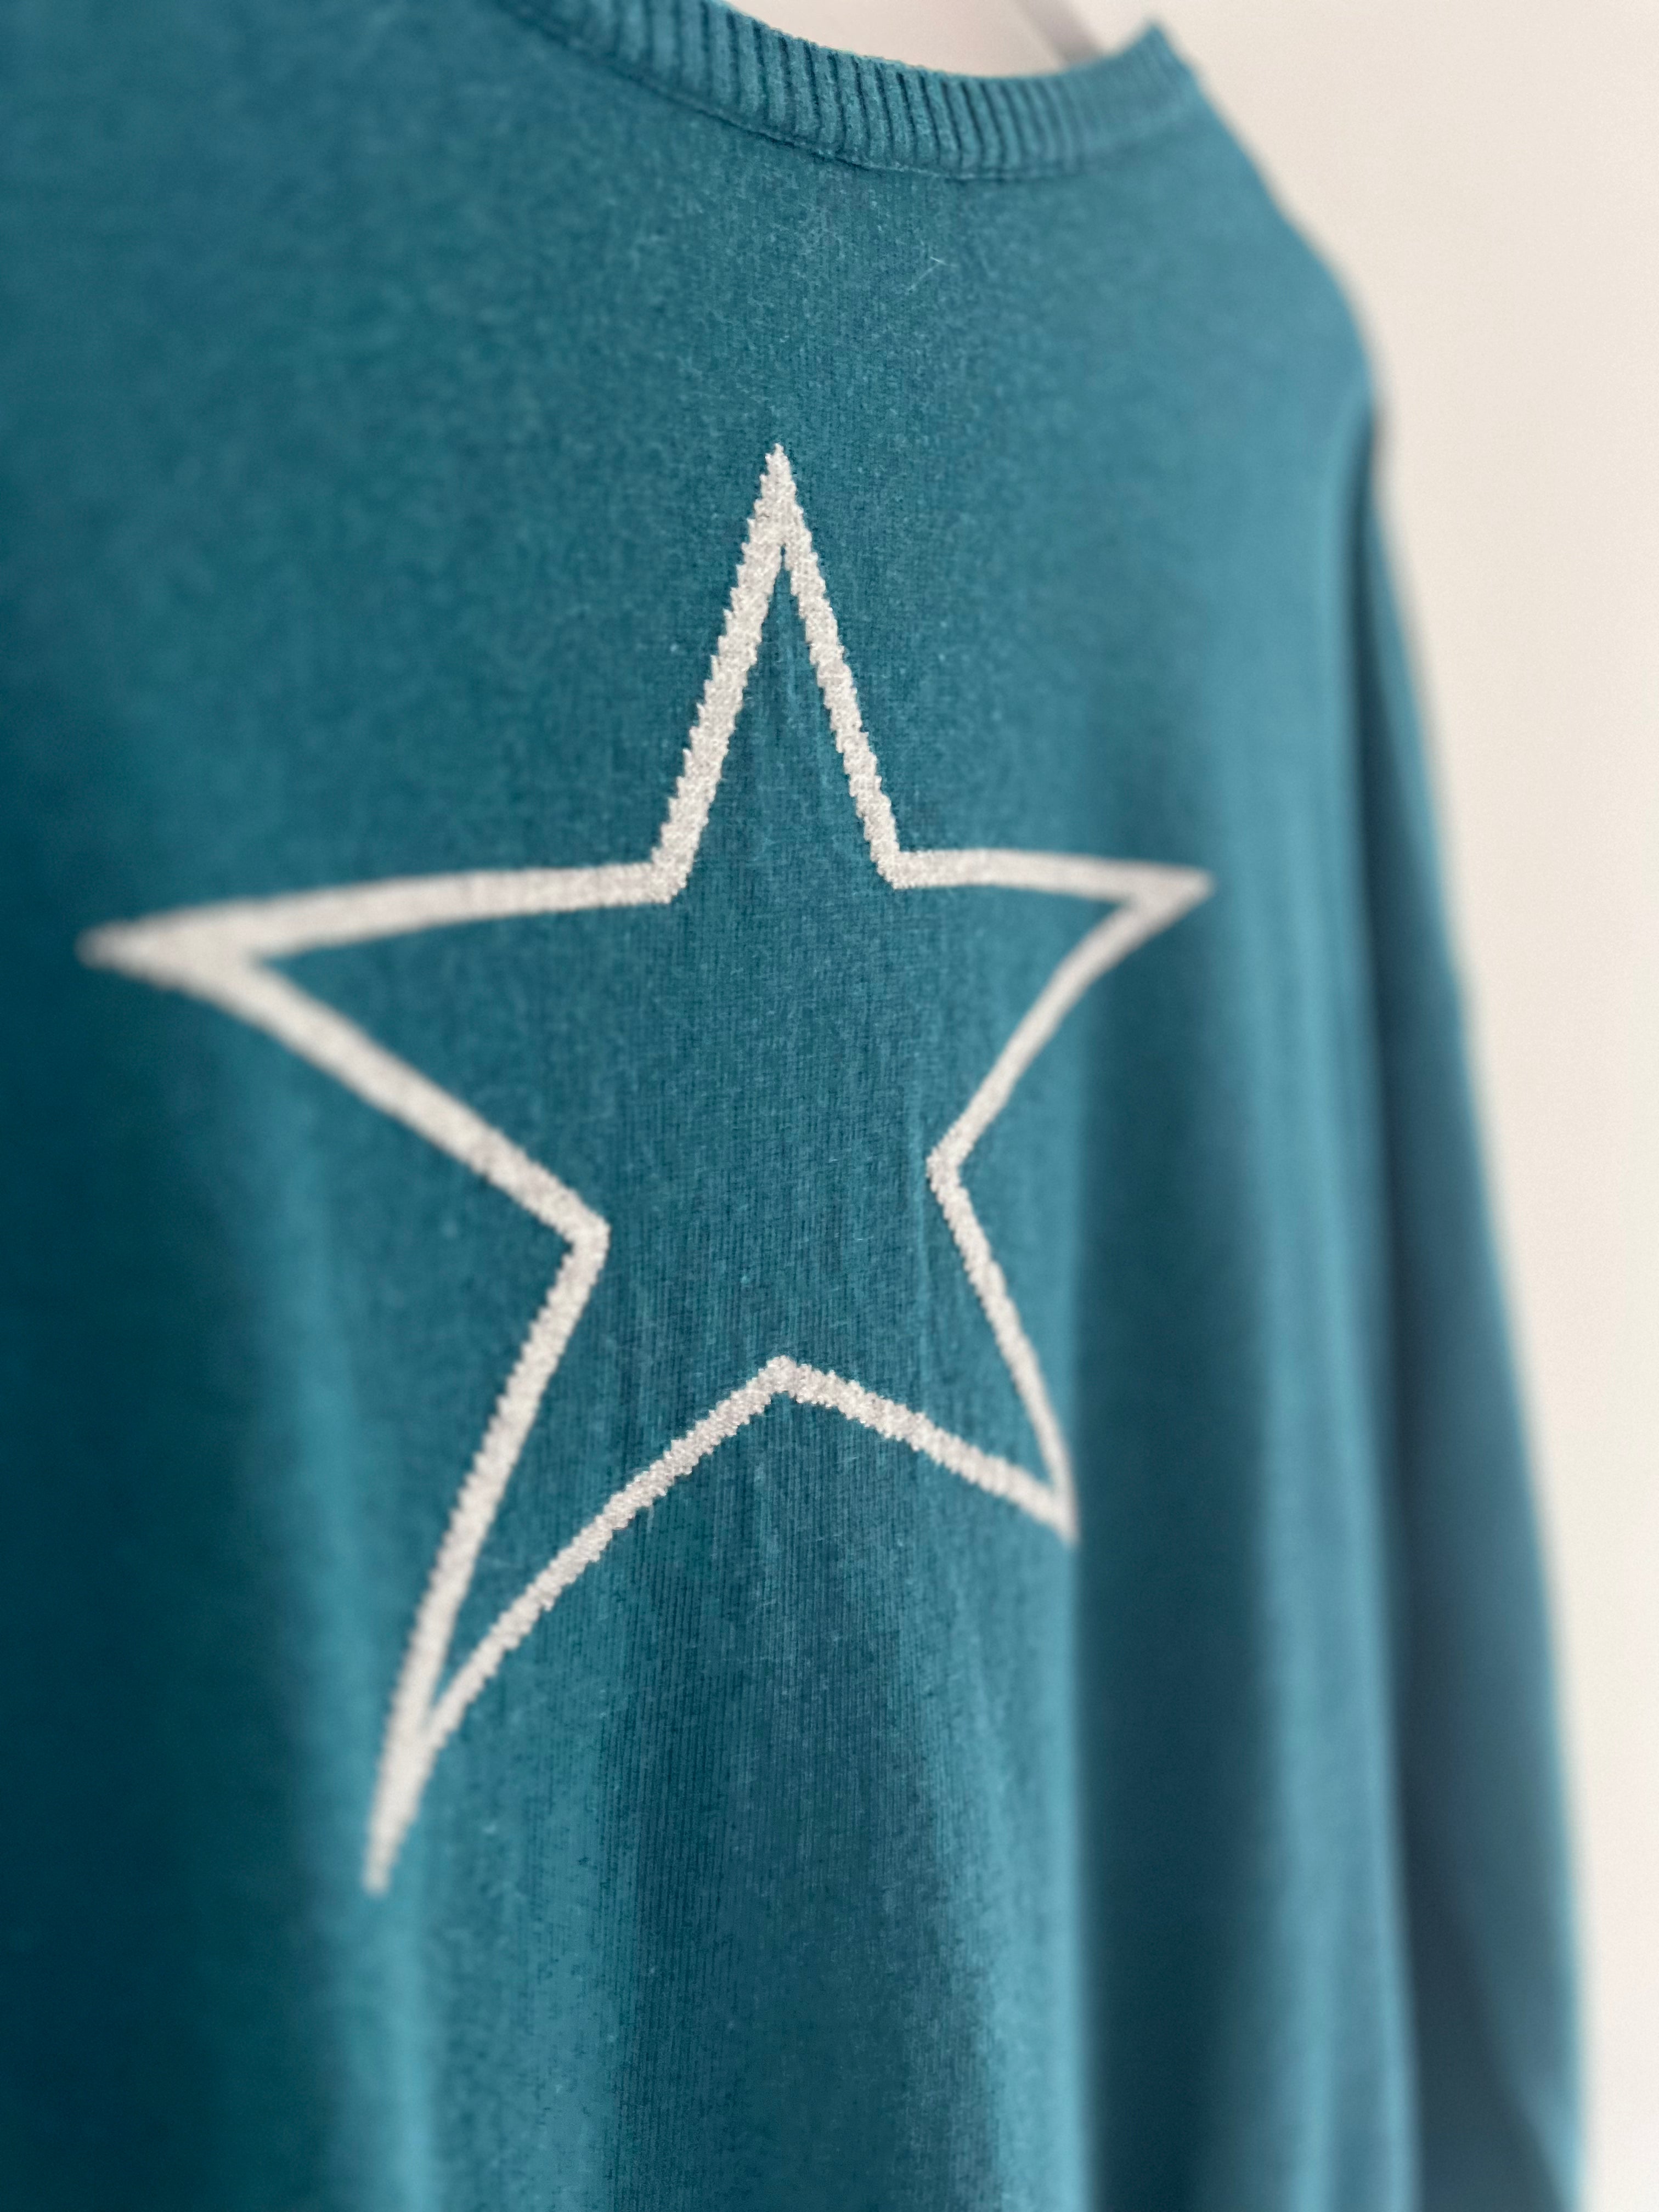 Star Cashmere Jumper in Teal & Silver